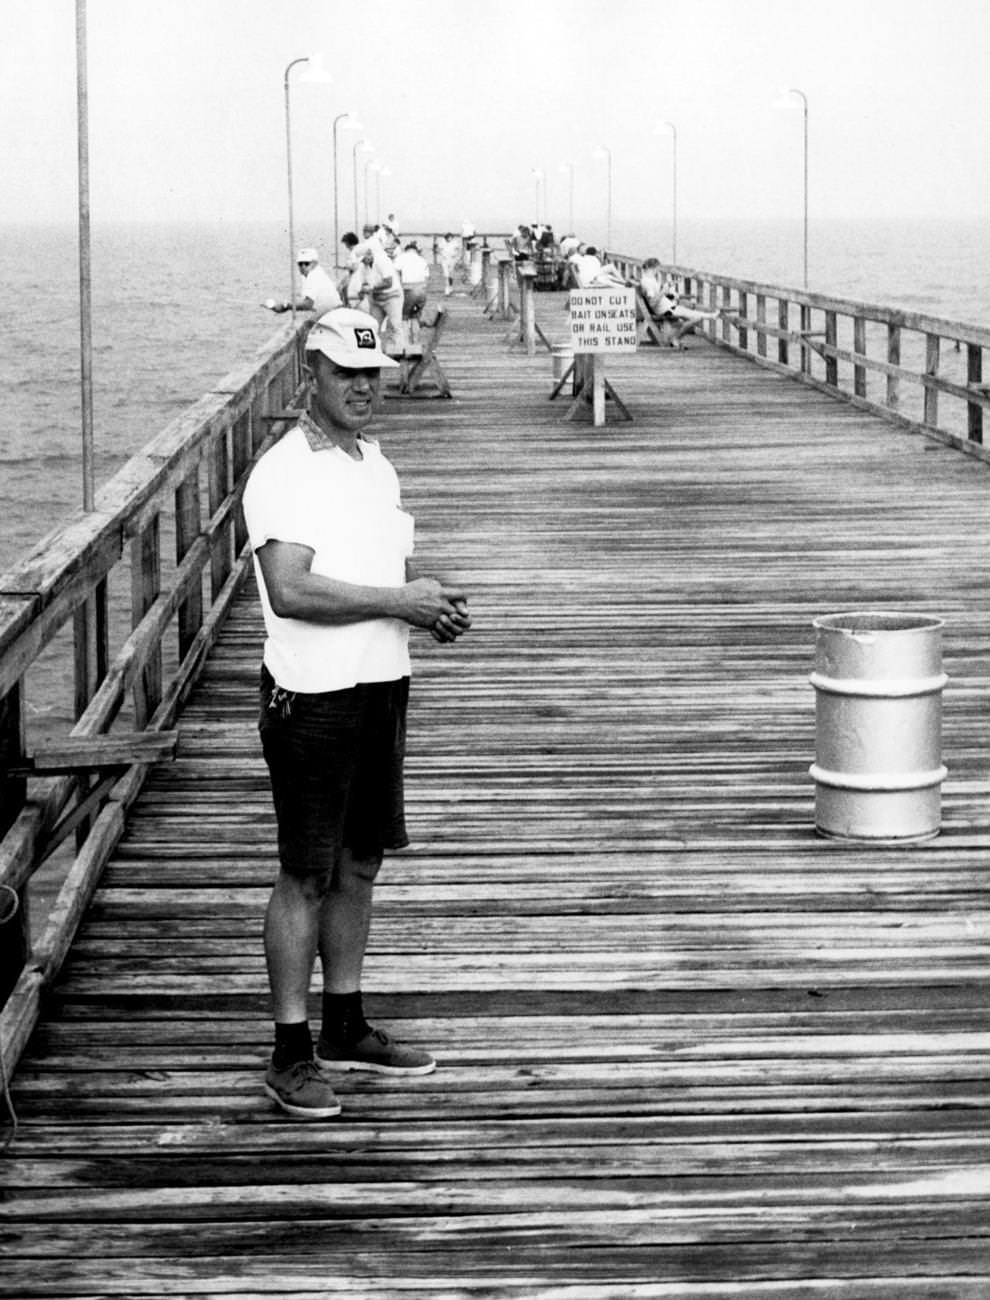 George C. “Skid” Abbott, who had converted the old Gordon’s fish packing house at Buckroe Beach in Hampton into a popular sport-fishing pier that attracted anglers for day and night fishing, 1961.